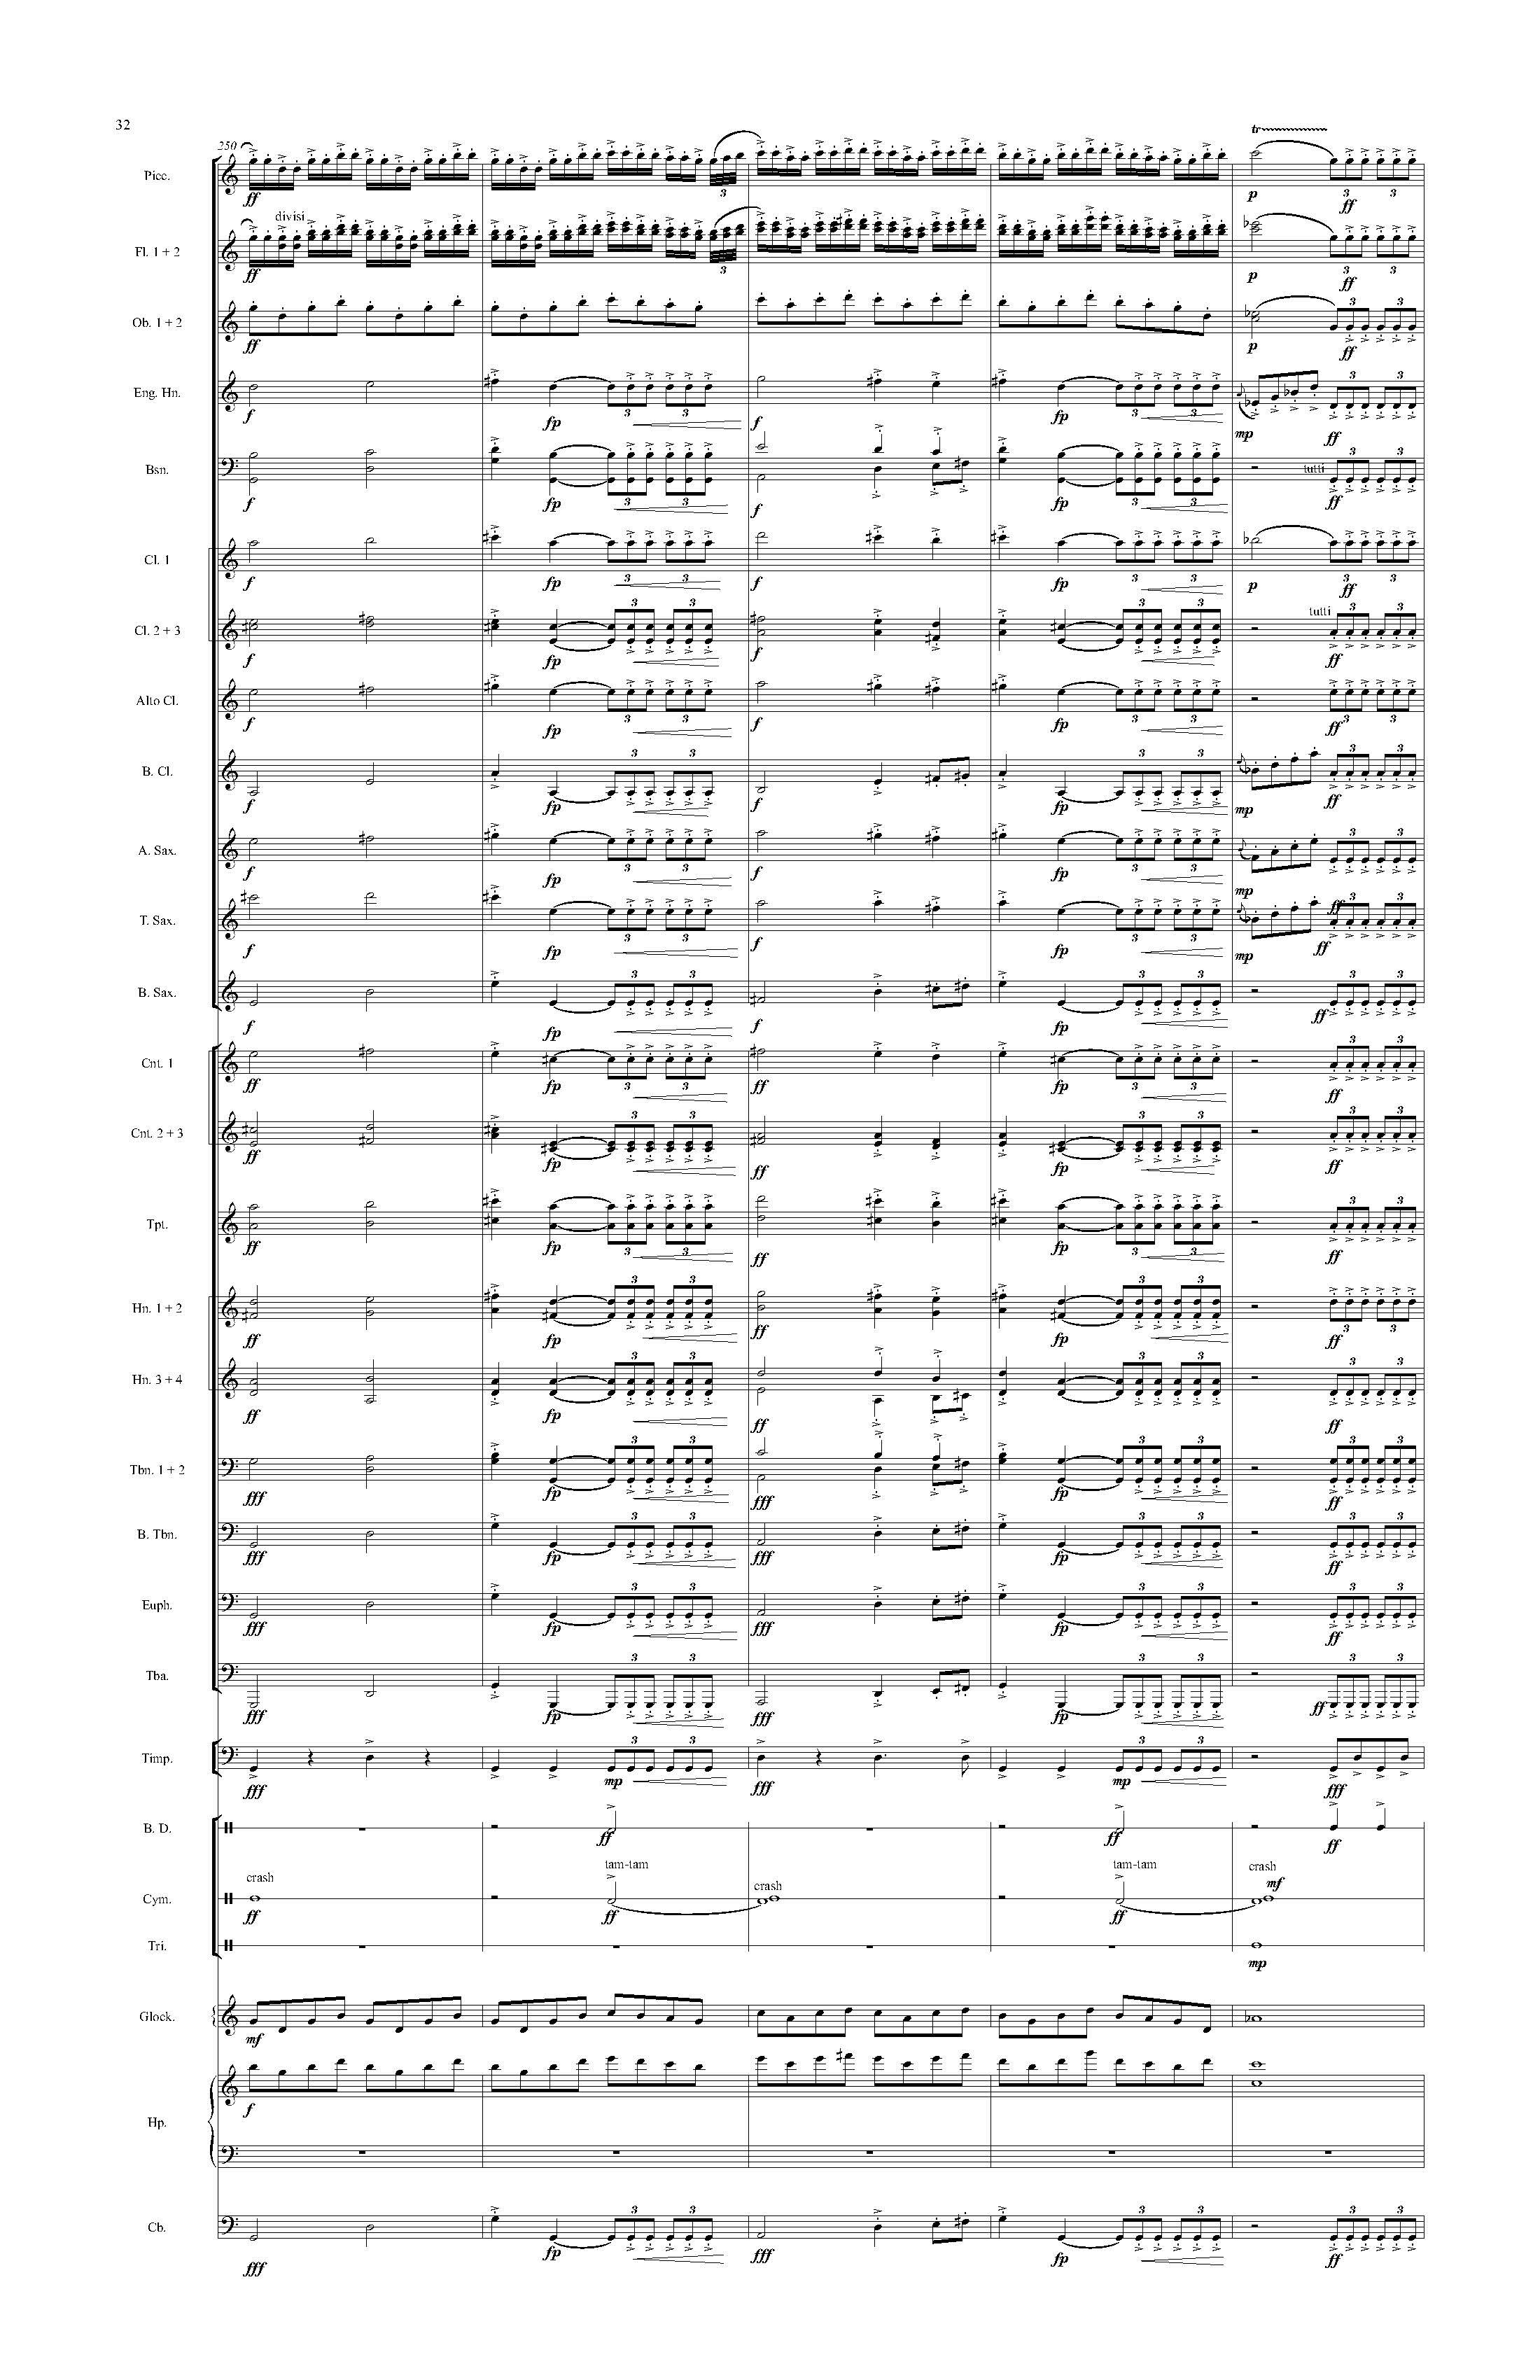 Psyche - Complete Score_Page_38.jpg